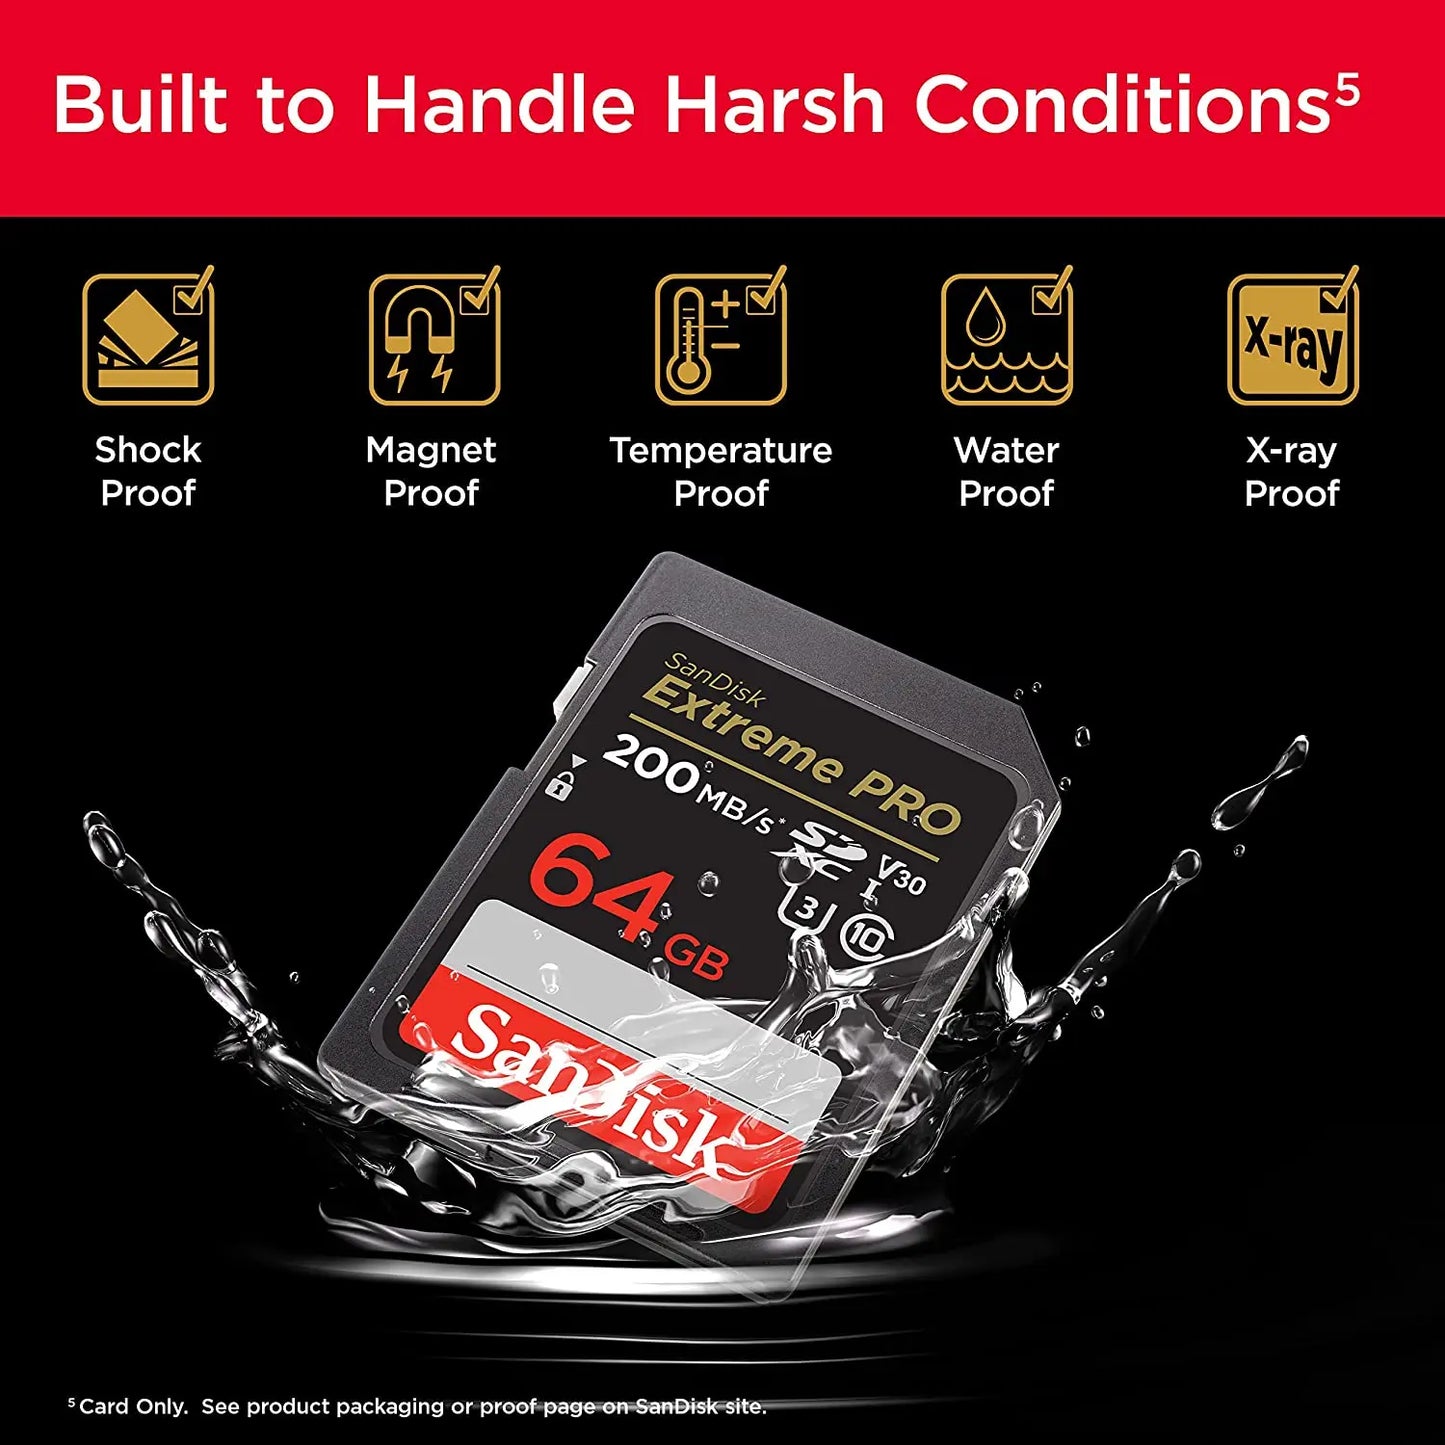 sd card, extreme pro sd card, high speed sd card, memory card, sandisk extreme pro sd card, card sd, extreme pro